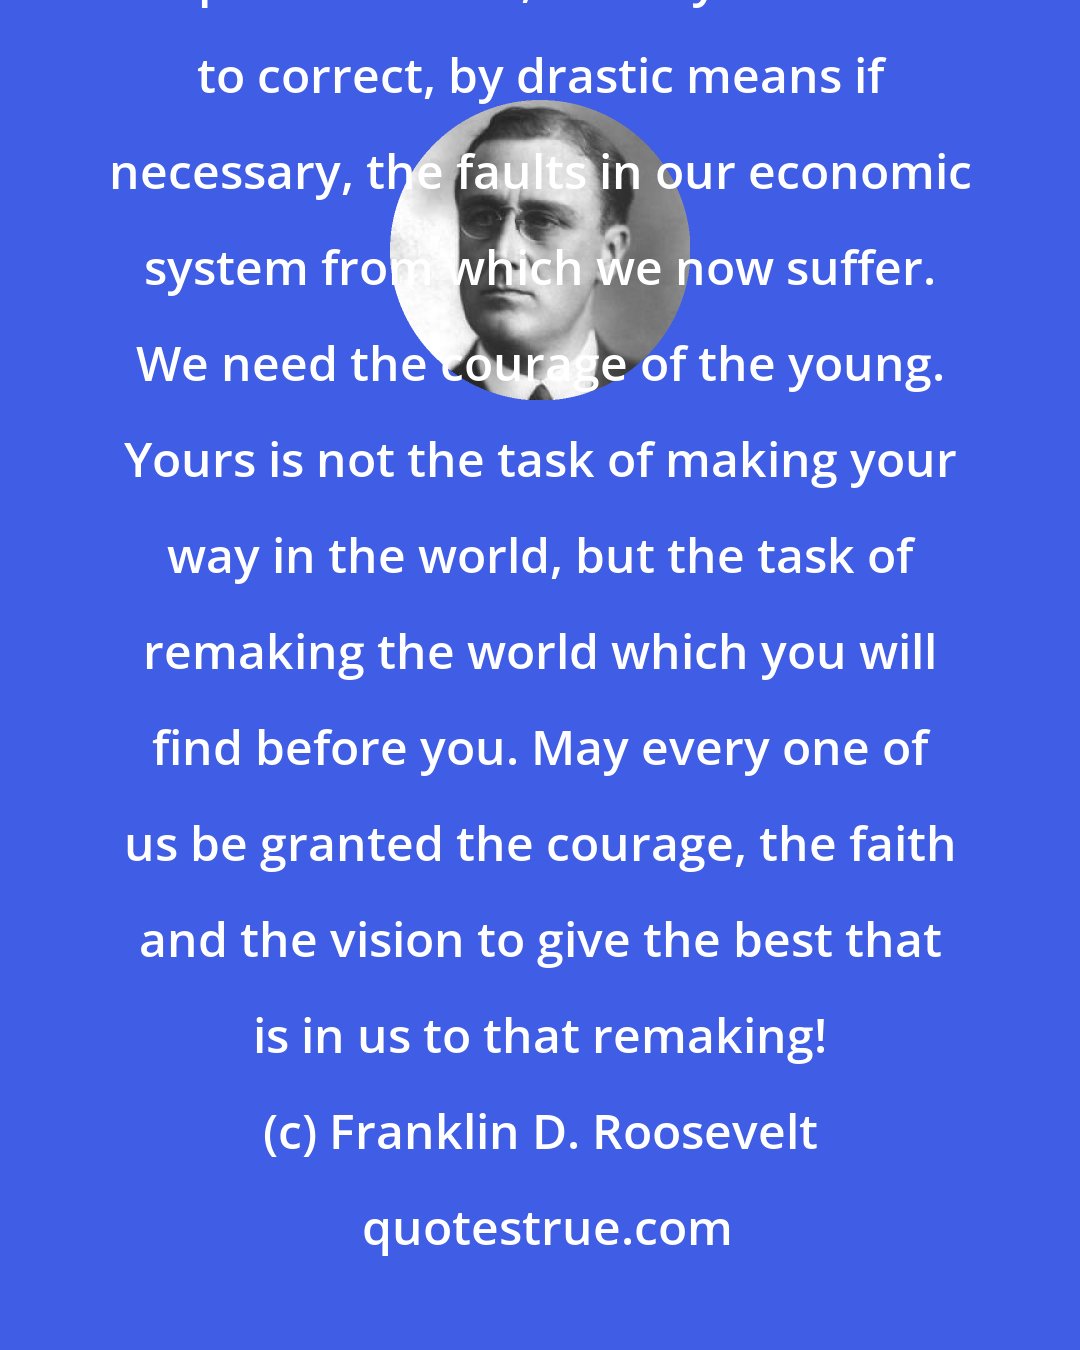 Franklin D. Roosevelt: We need enthusiasm, imagination and the ability to face facts, even unpleasant ones, bravely. We need to correct, by drastic means if necessary, the faults in our economic system from which we now suffer. We need the courage of the young. Yours is not the task of making your way in the world, but the task of remaking the world which you will find before you. May every one of us be granted the courage, the faith and the vision to give the best that is in us to that remaking!